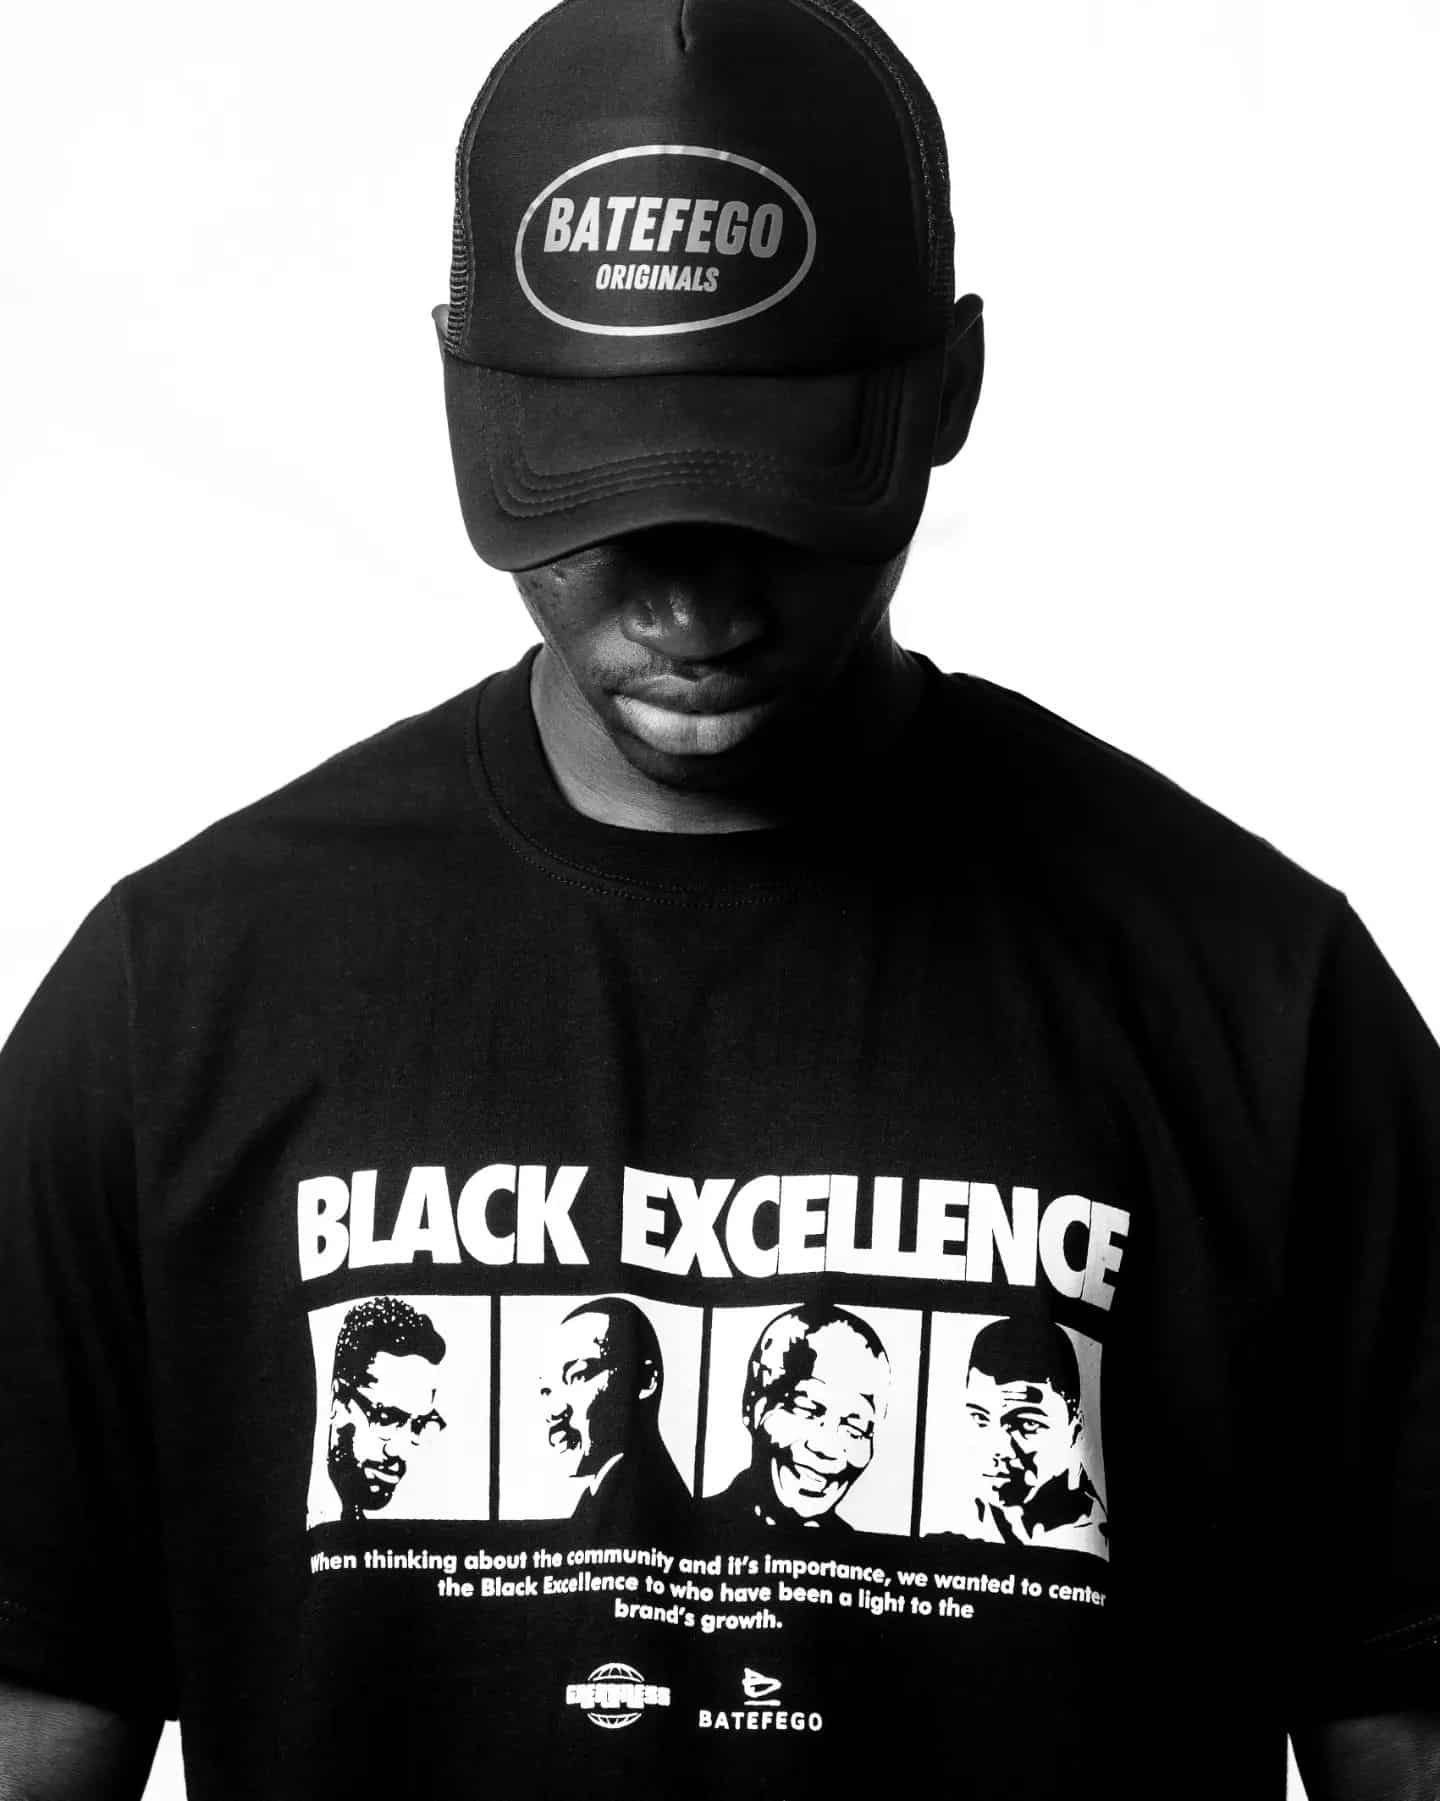 Black Excellence Tshirt (Batefego x Greatness)